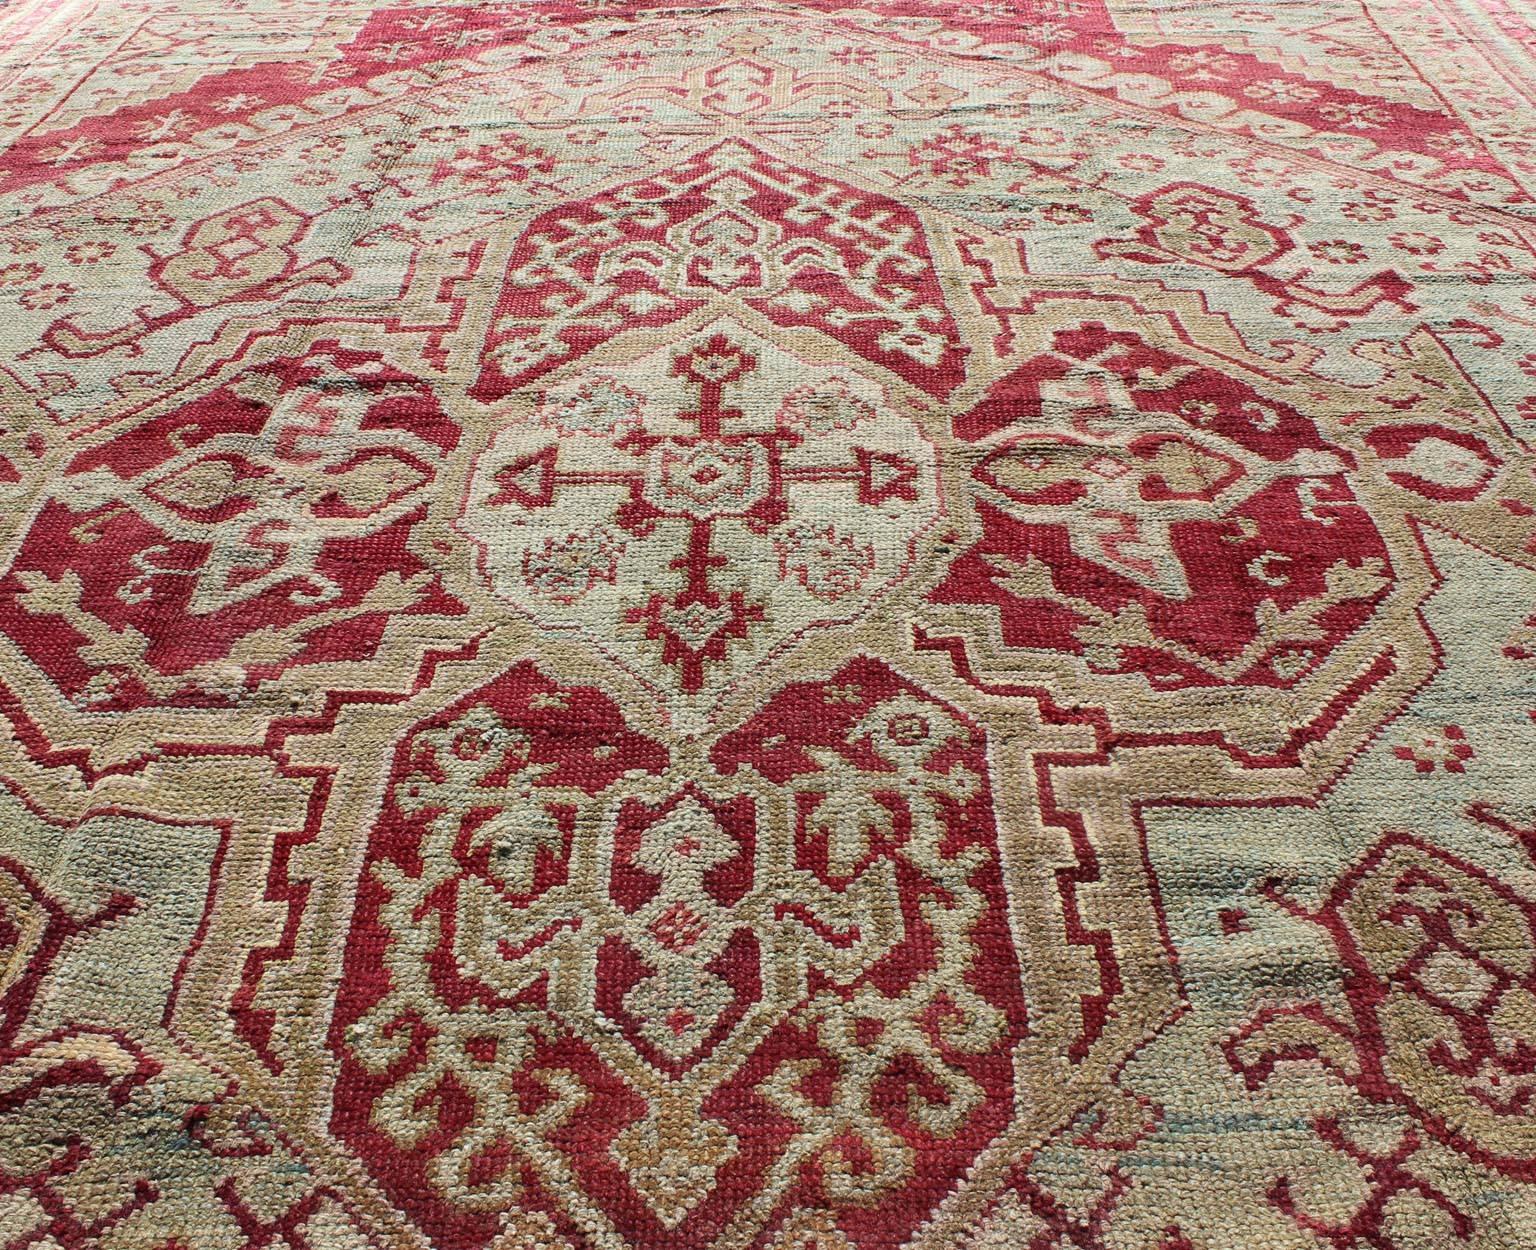 Wool Antique Turkish Ghiordes 19th Century Rug in Raspberry Red, Ice Blue & L. Green For Sale